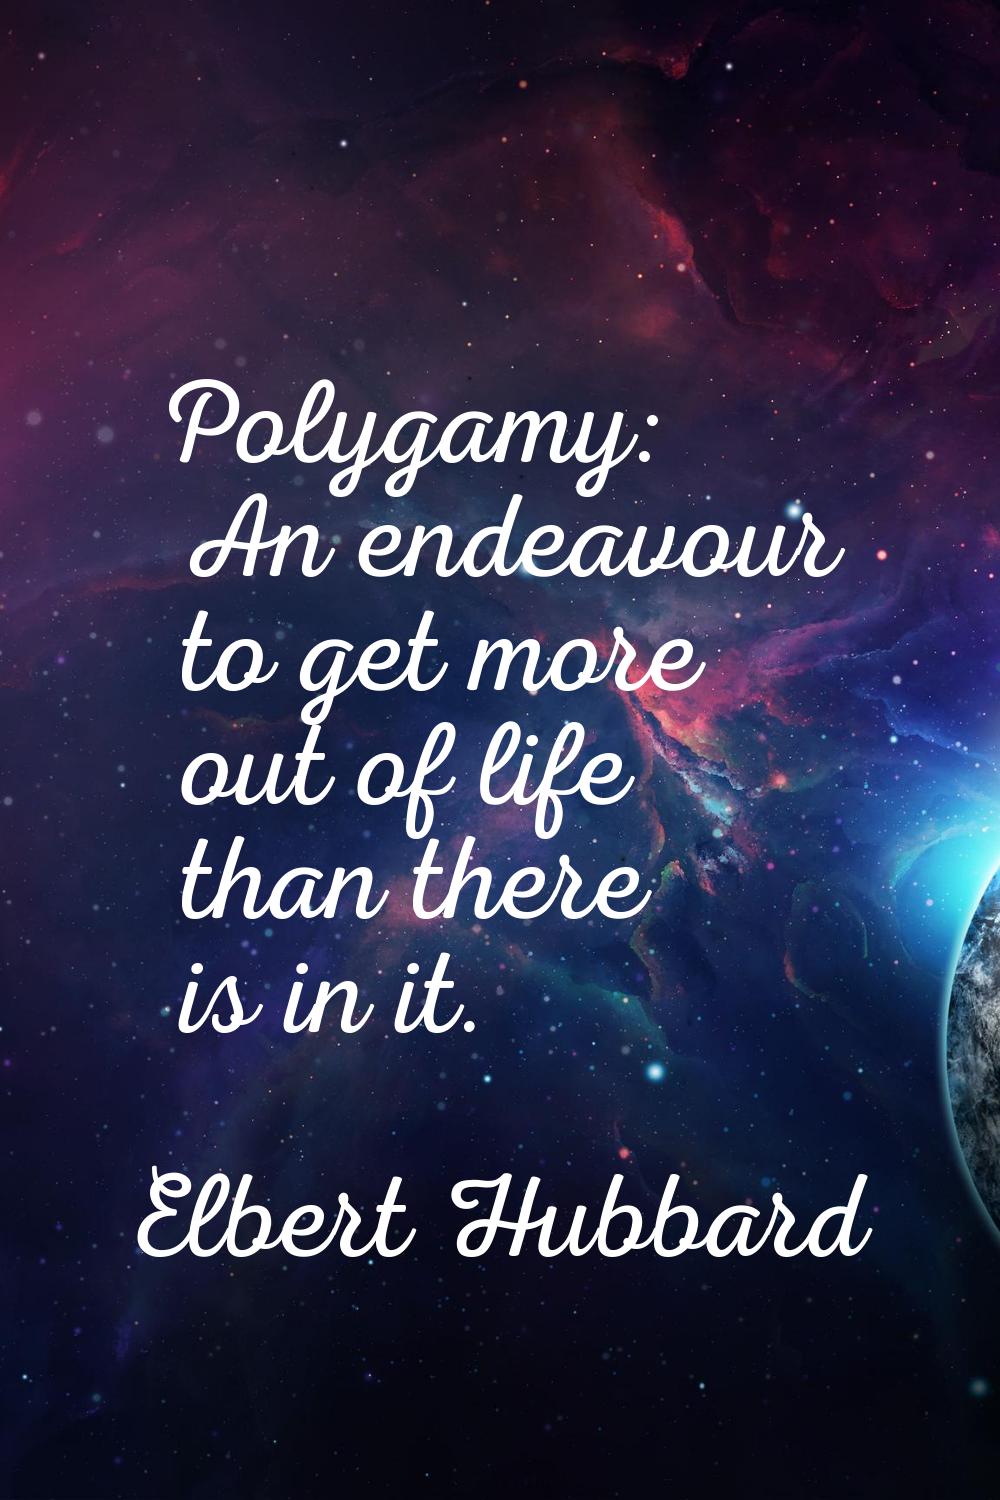 Polygamy: An endeavour to get more out of life than there is in it.